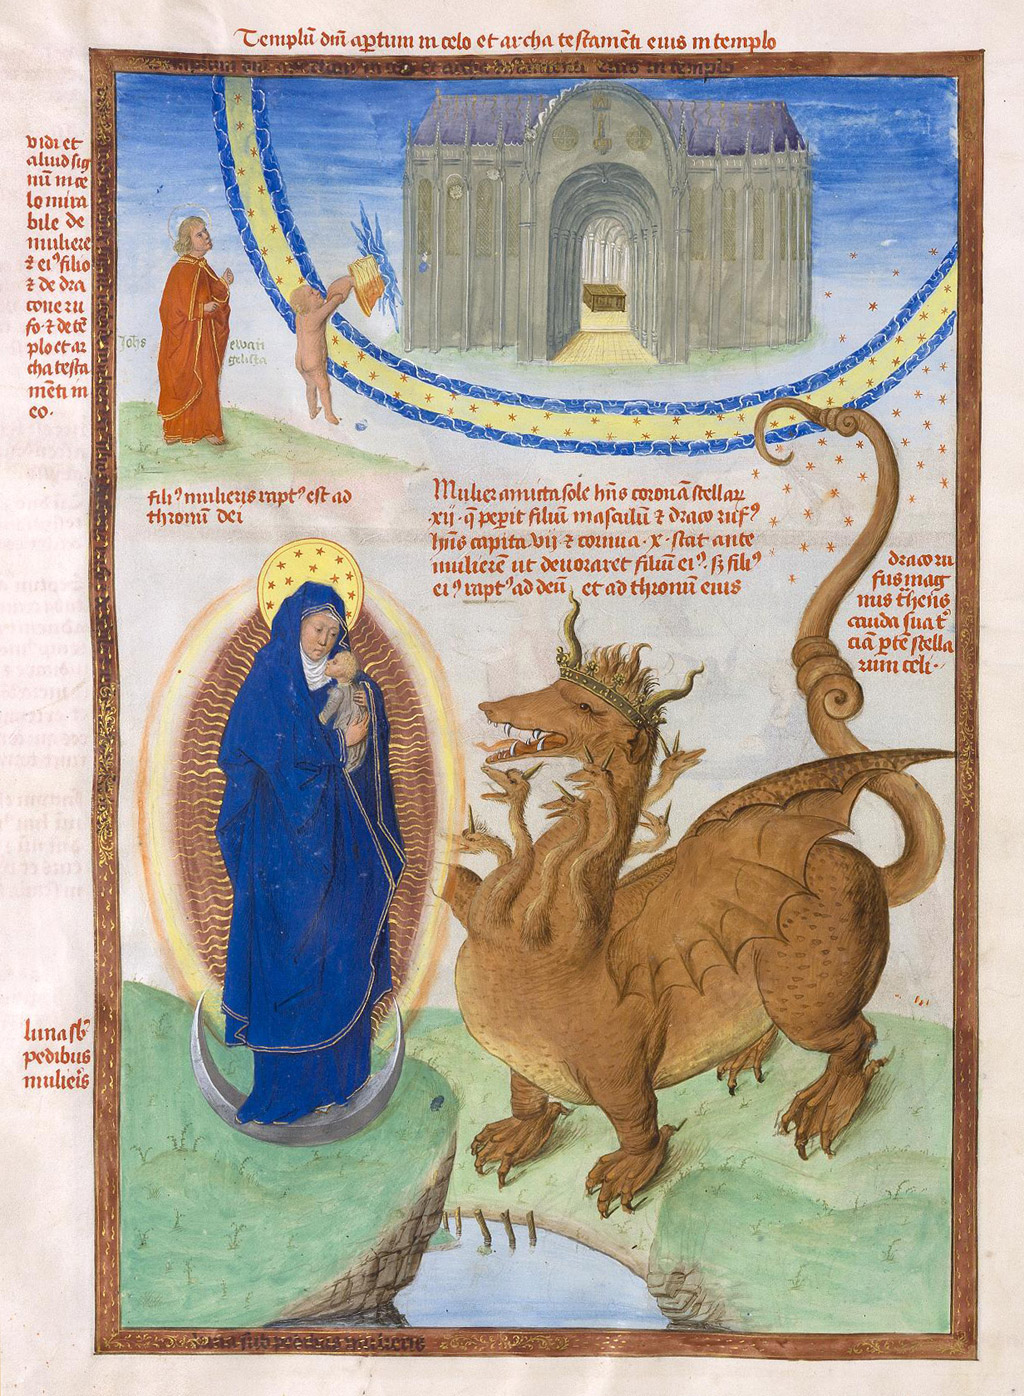 seven-headed dragon attacking woman in medieval illustration of Revelation 12